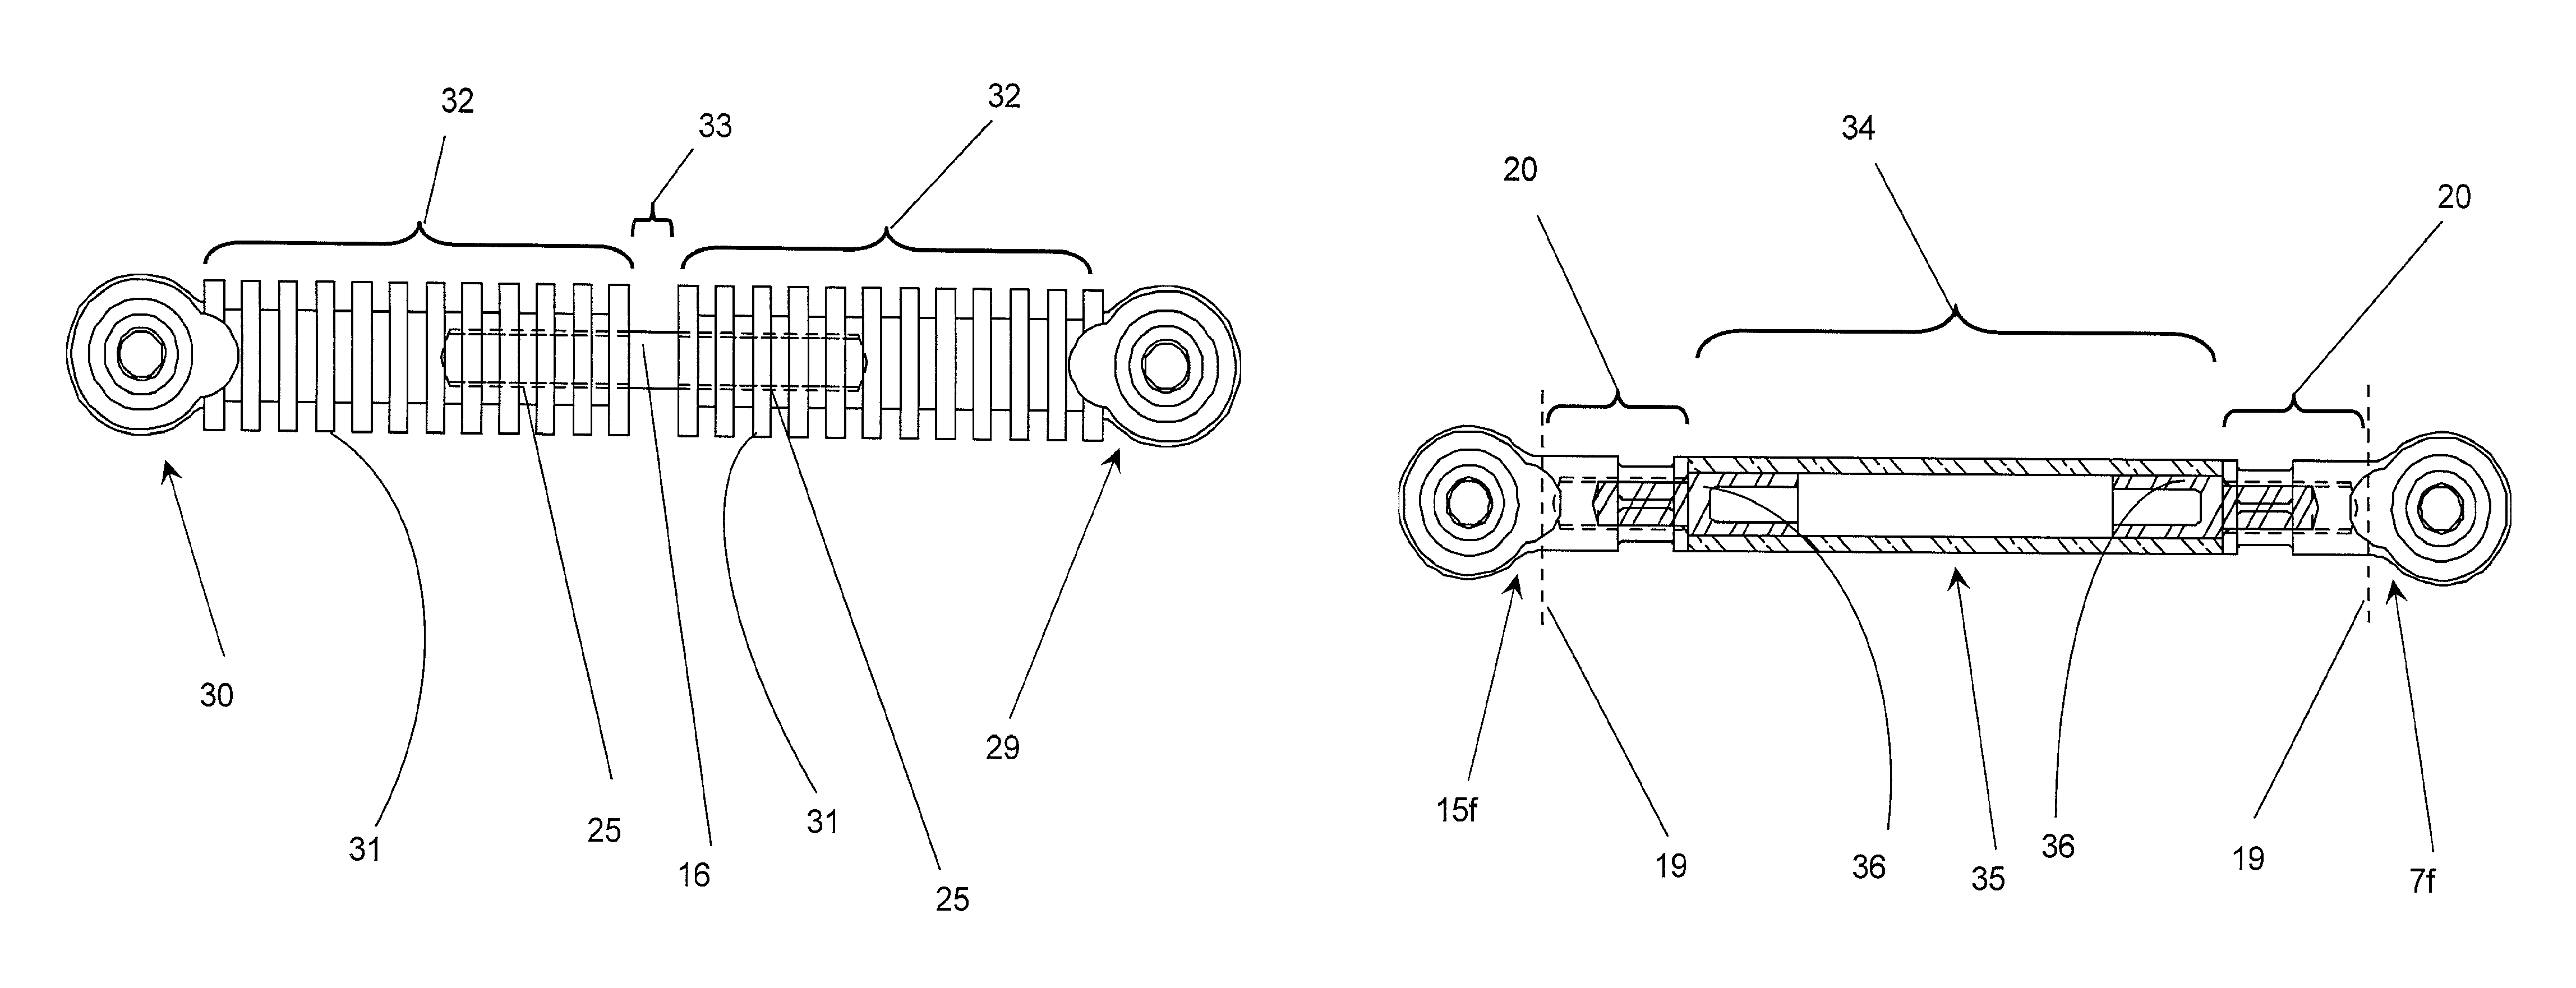 Turbocharger control linkage with reduced heat flow